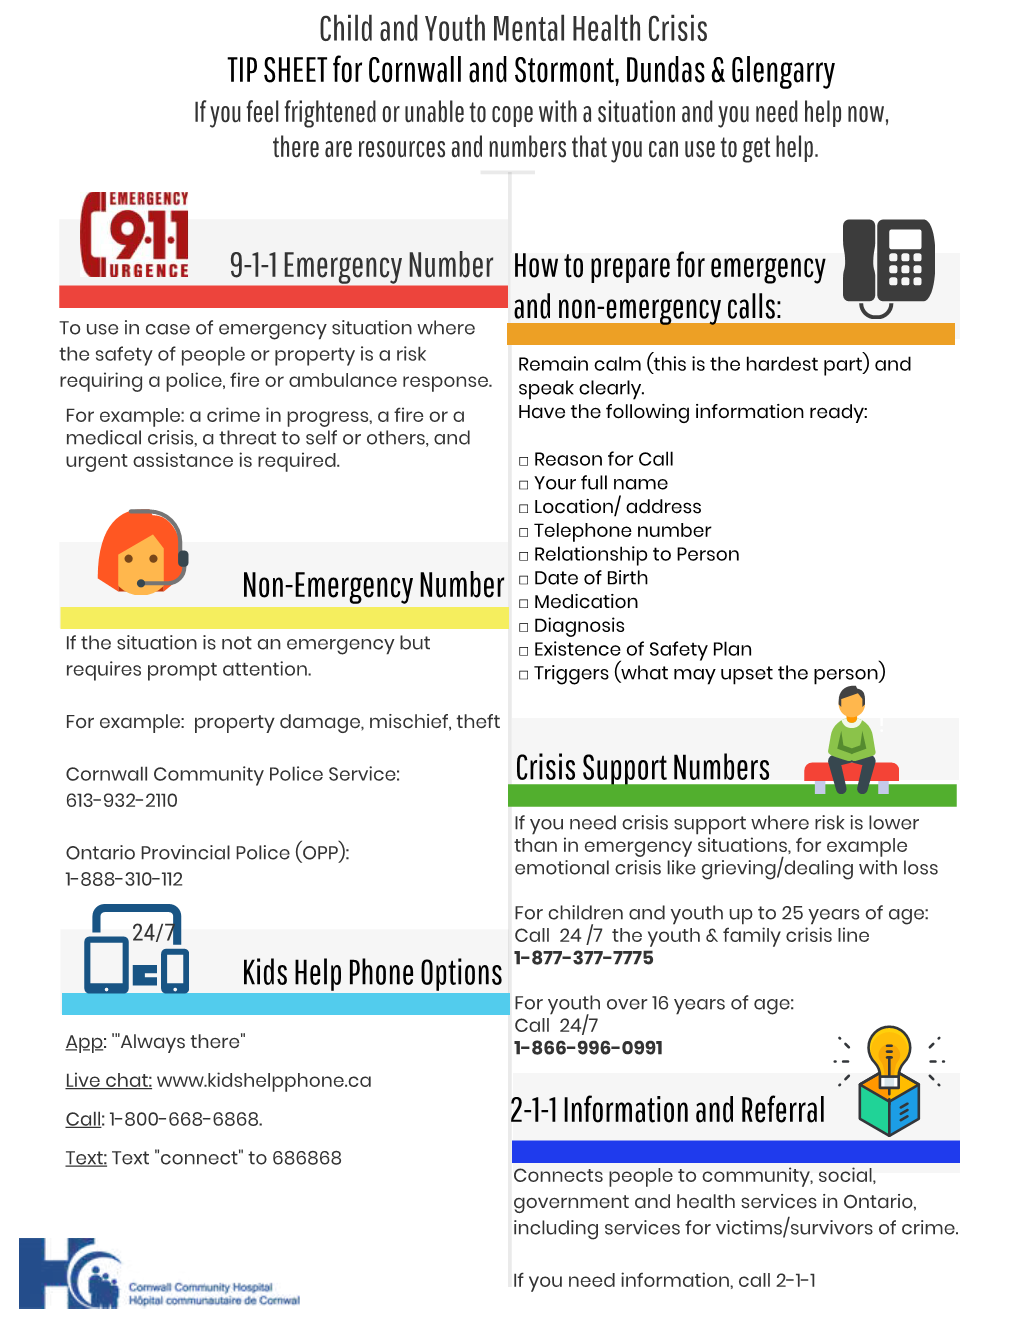 TIP SHEET for Cornwall and Stormont, Dundas & Glengarry Non-Emergency Number Crisis Support Numbers 2-1-1 Information and Re